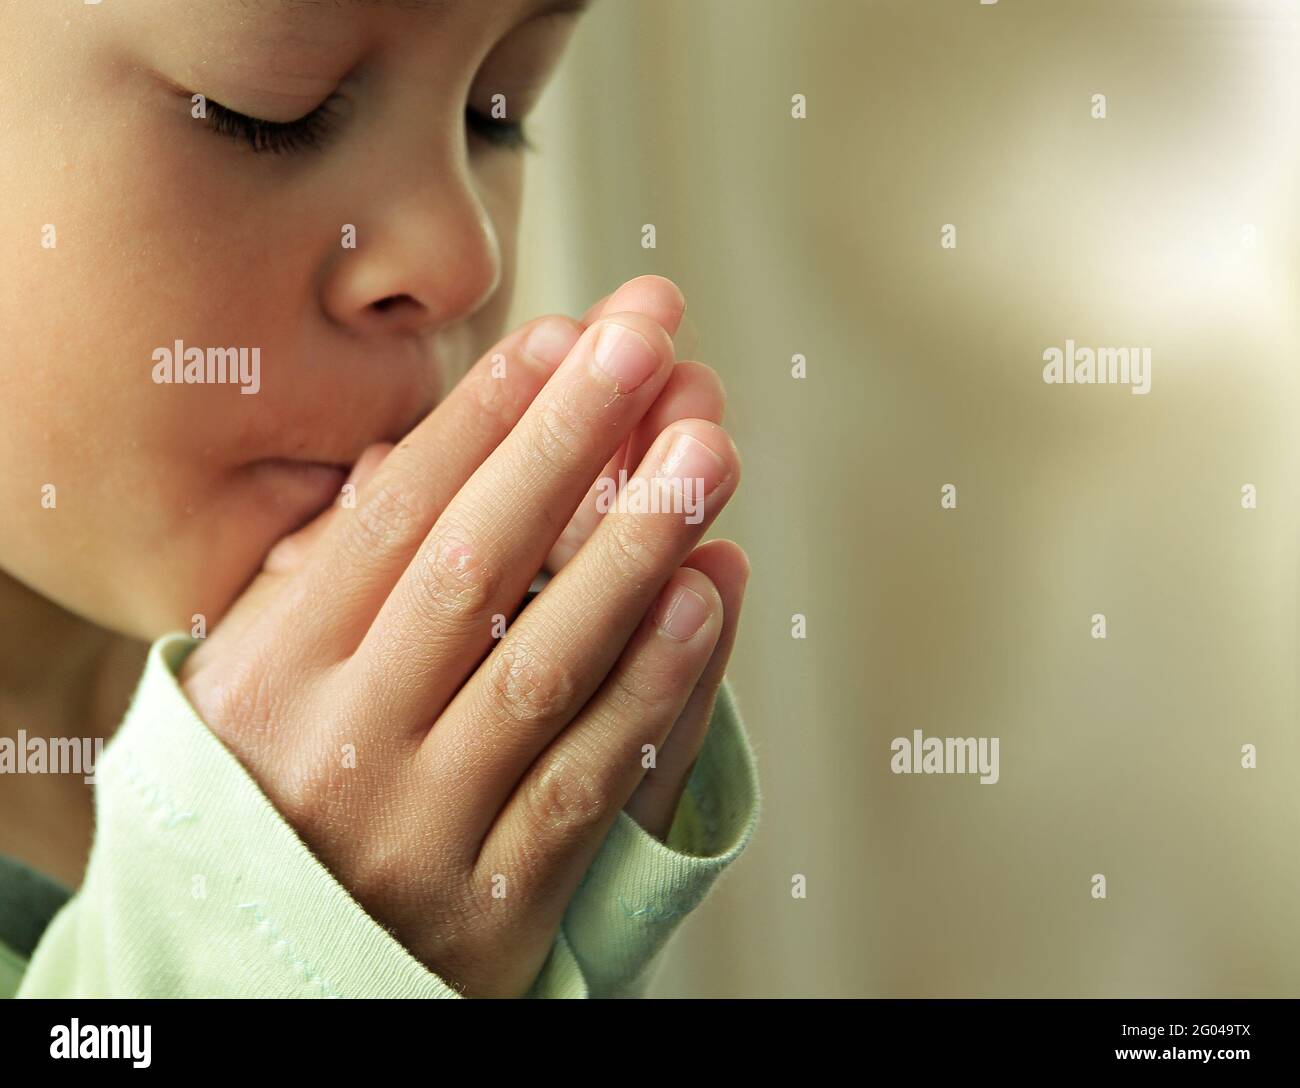 boy praying to god with closed eyes and hands held together stock photo Stock Photo